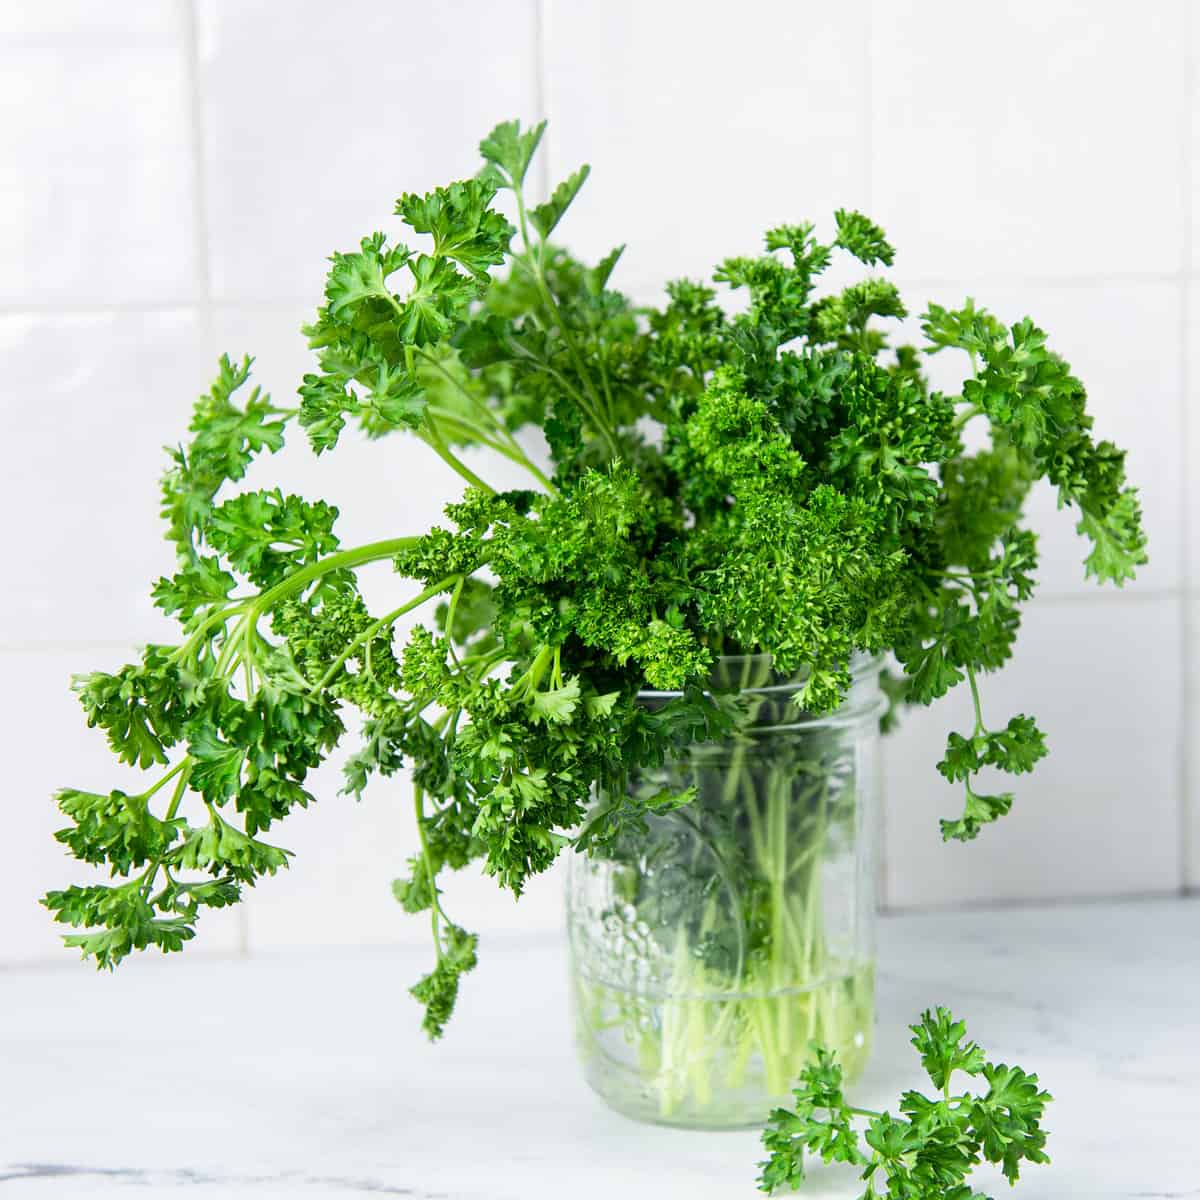 Parsley in water on a counter.